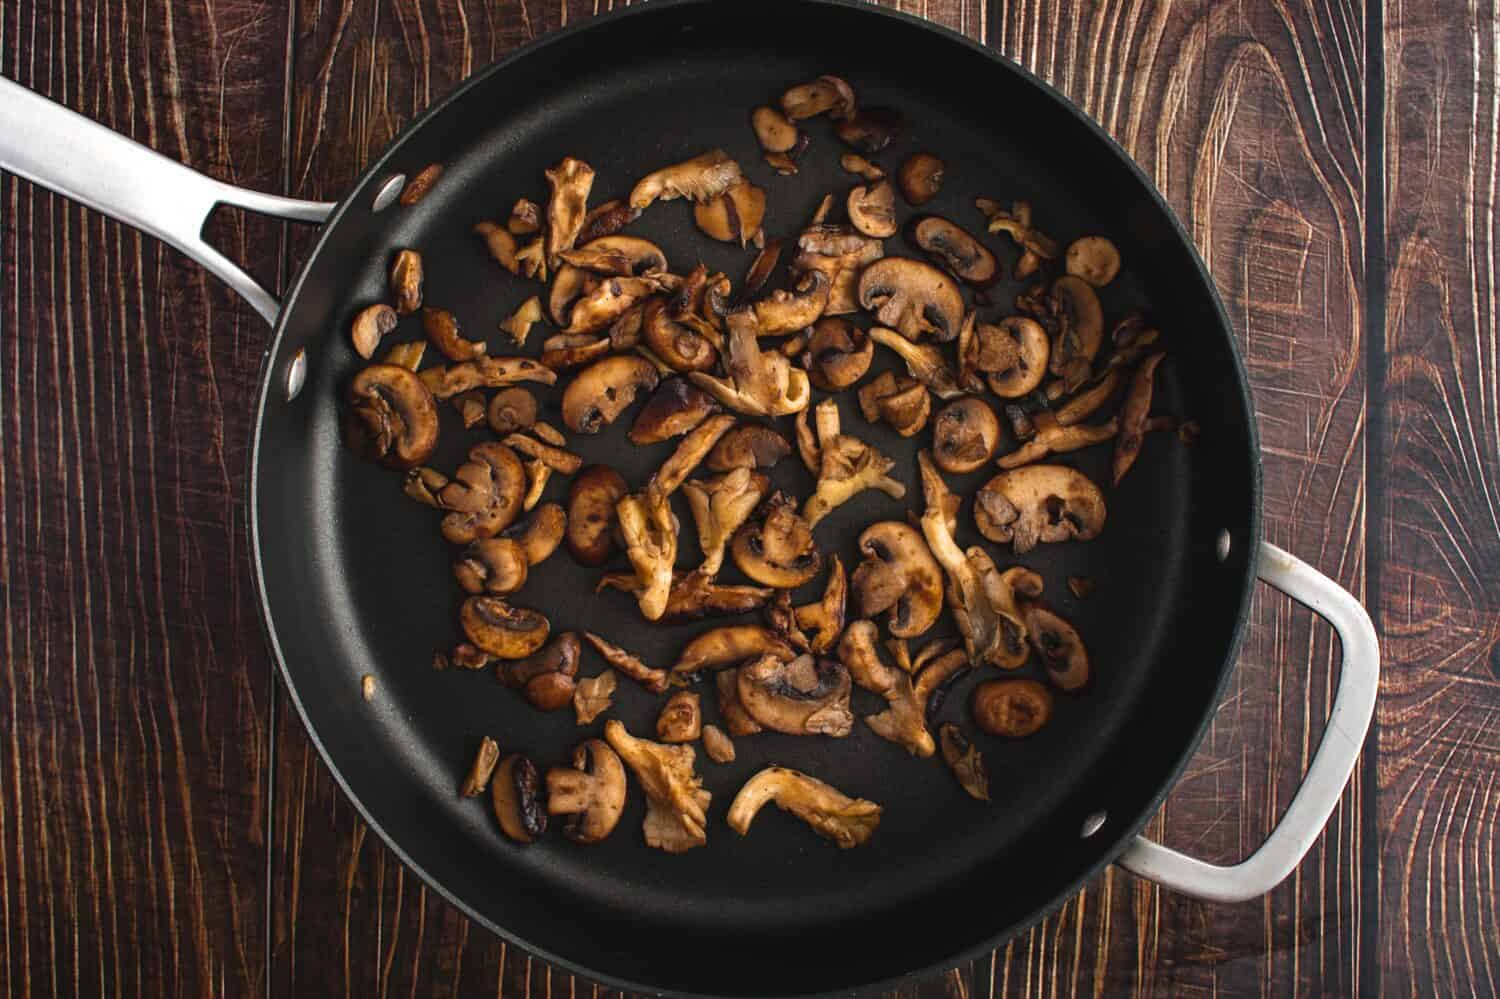 Browned Wild Mushrooms in a Non-stick Saute Pan Viewed from Above: Overhead view of oyster, shiitake, and crimini mushrooms cooked in butter